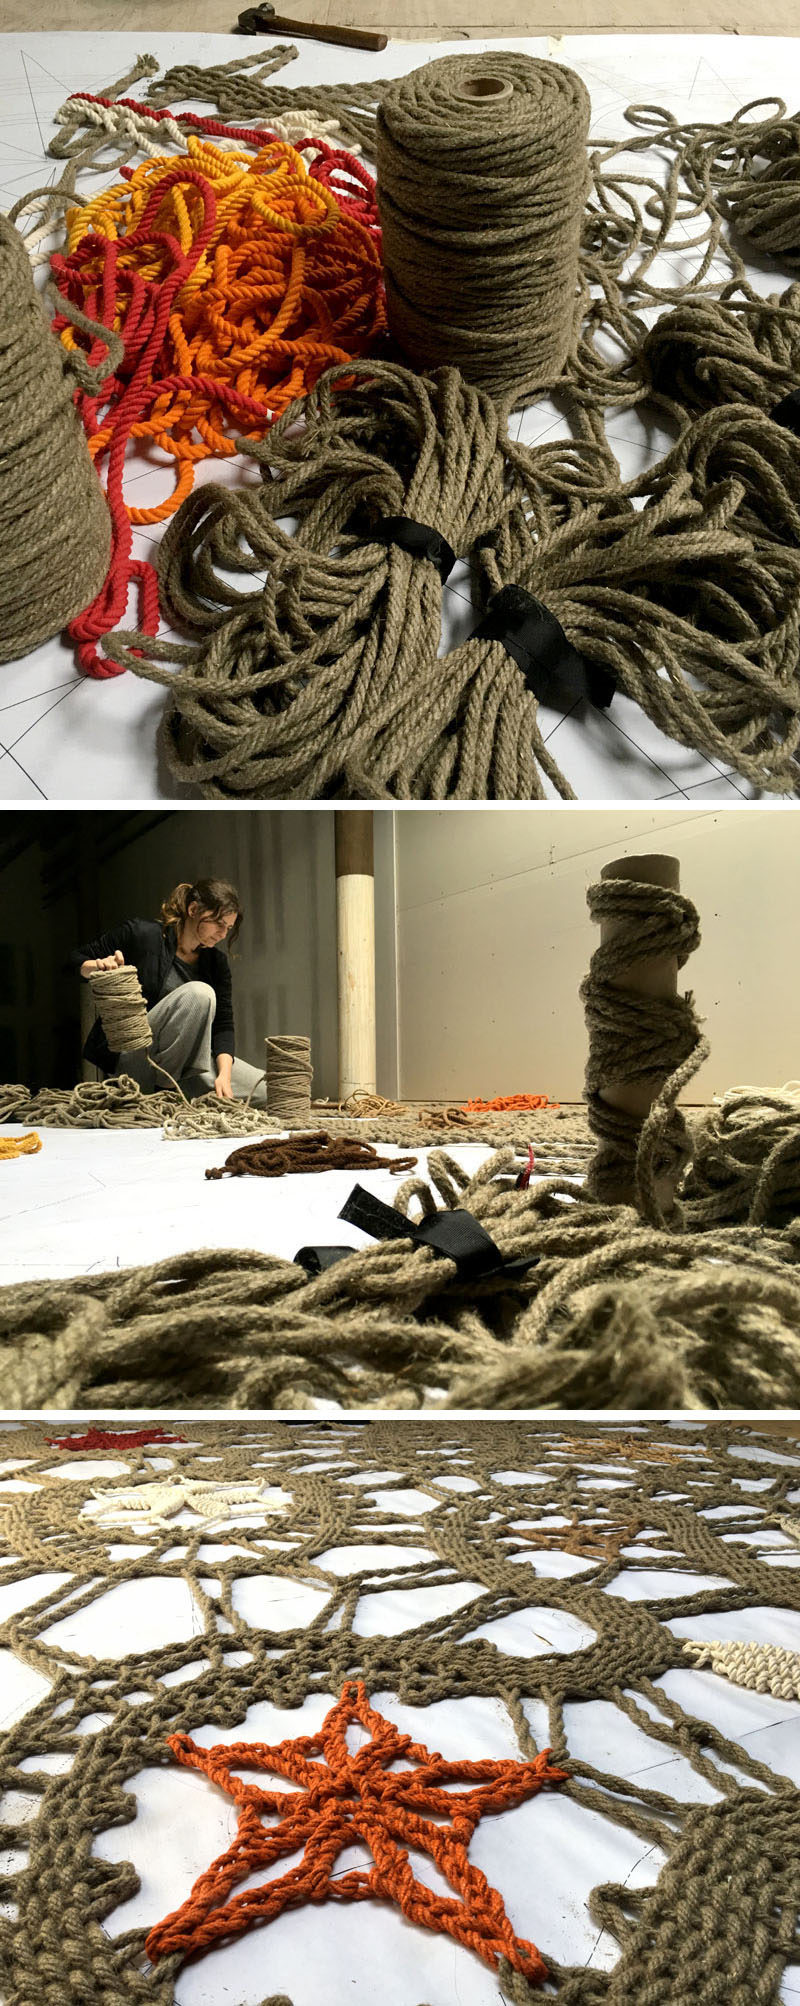 Artist Manca Ahlin of Mantzalin, was commissioned by Etsy to create a collection of handmade rope installations for their new head office in Dumbo, New York.